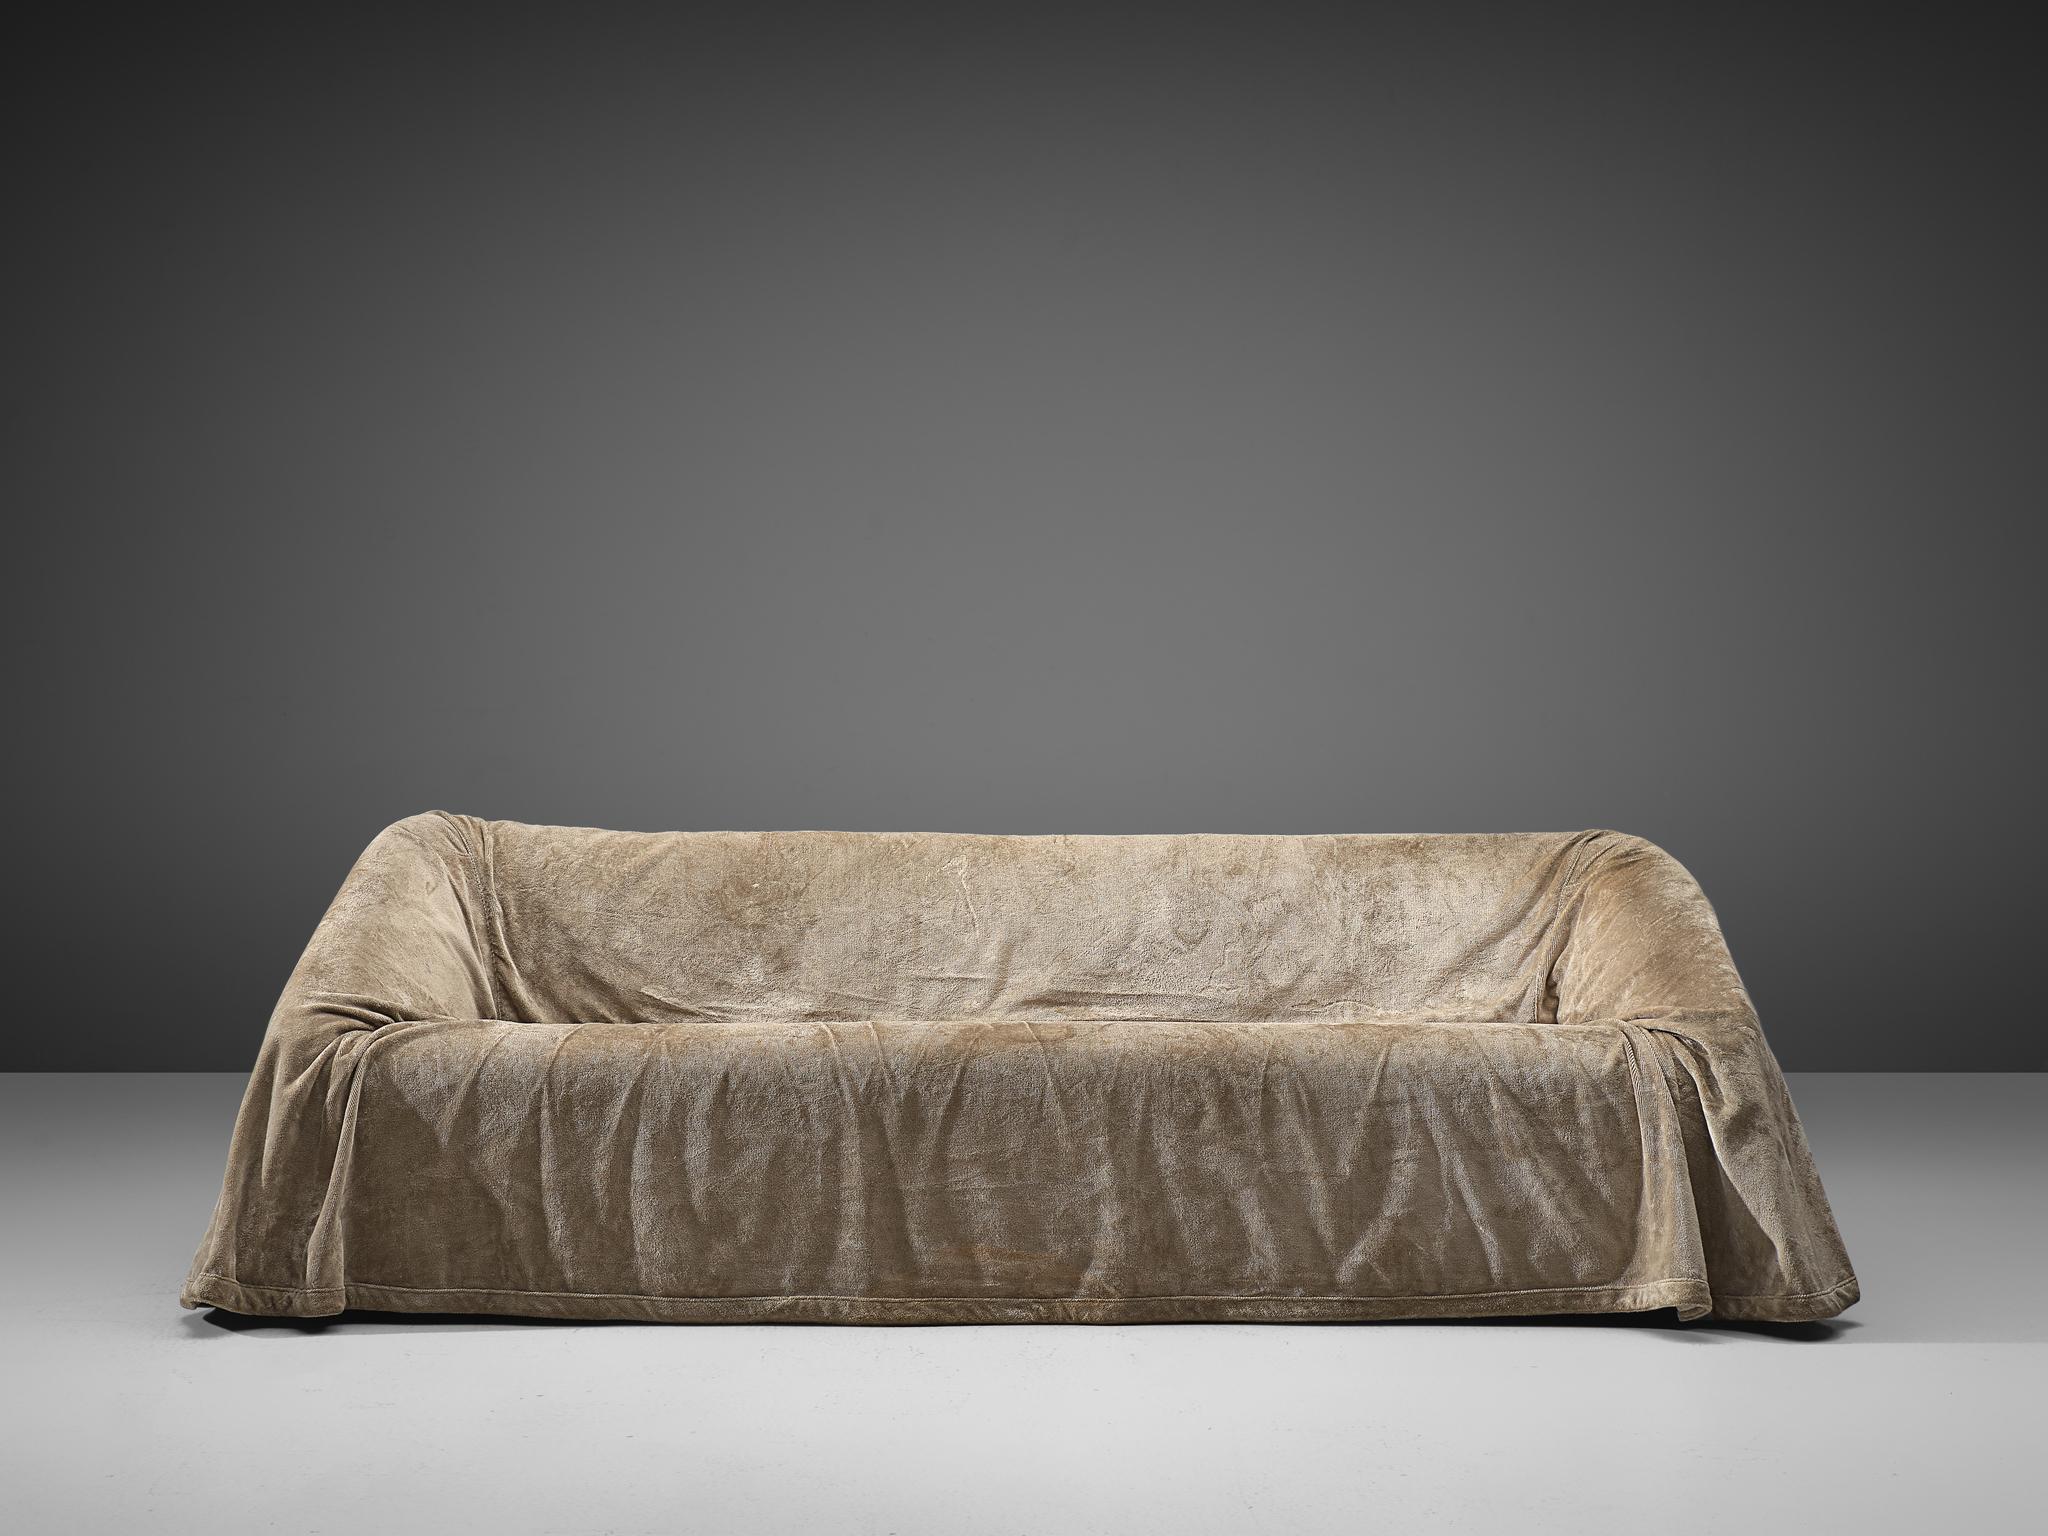 Kazuhide Takahama for Simon, 'Paradisoterrestre Mantilla' Sofa 225, velvet, Italy, 1974.

Stunning and serene Mantilla sofa by Kazuhide Takahama. The Mantilla's name comes from the mantle which covers it, thus distinguishing its look. The idea